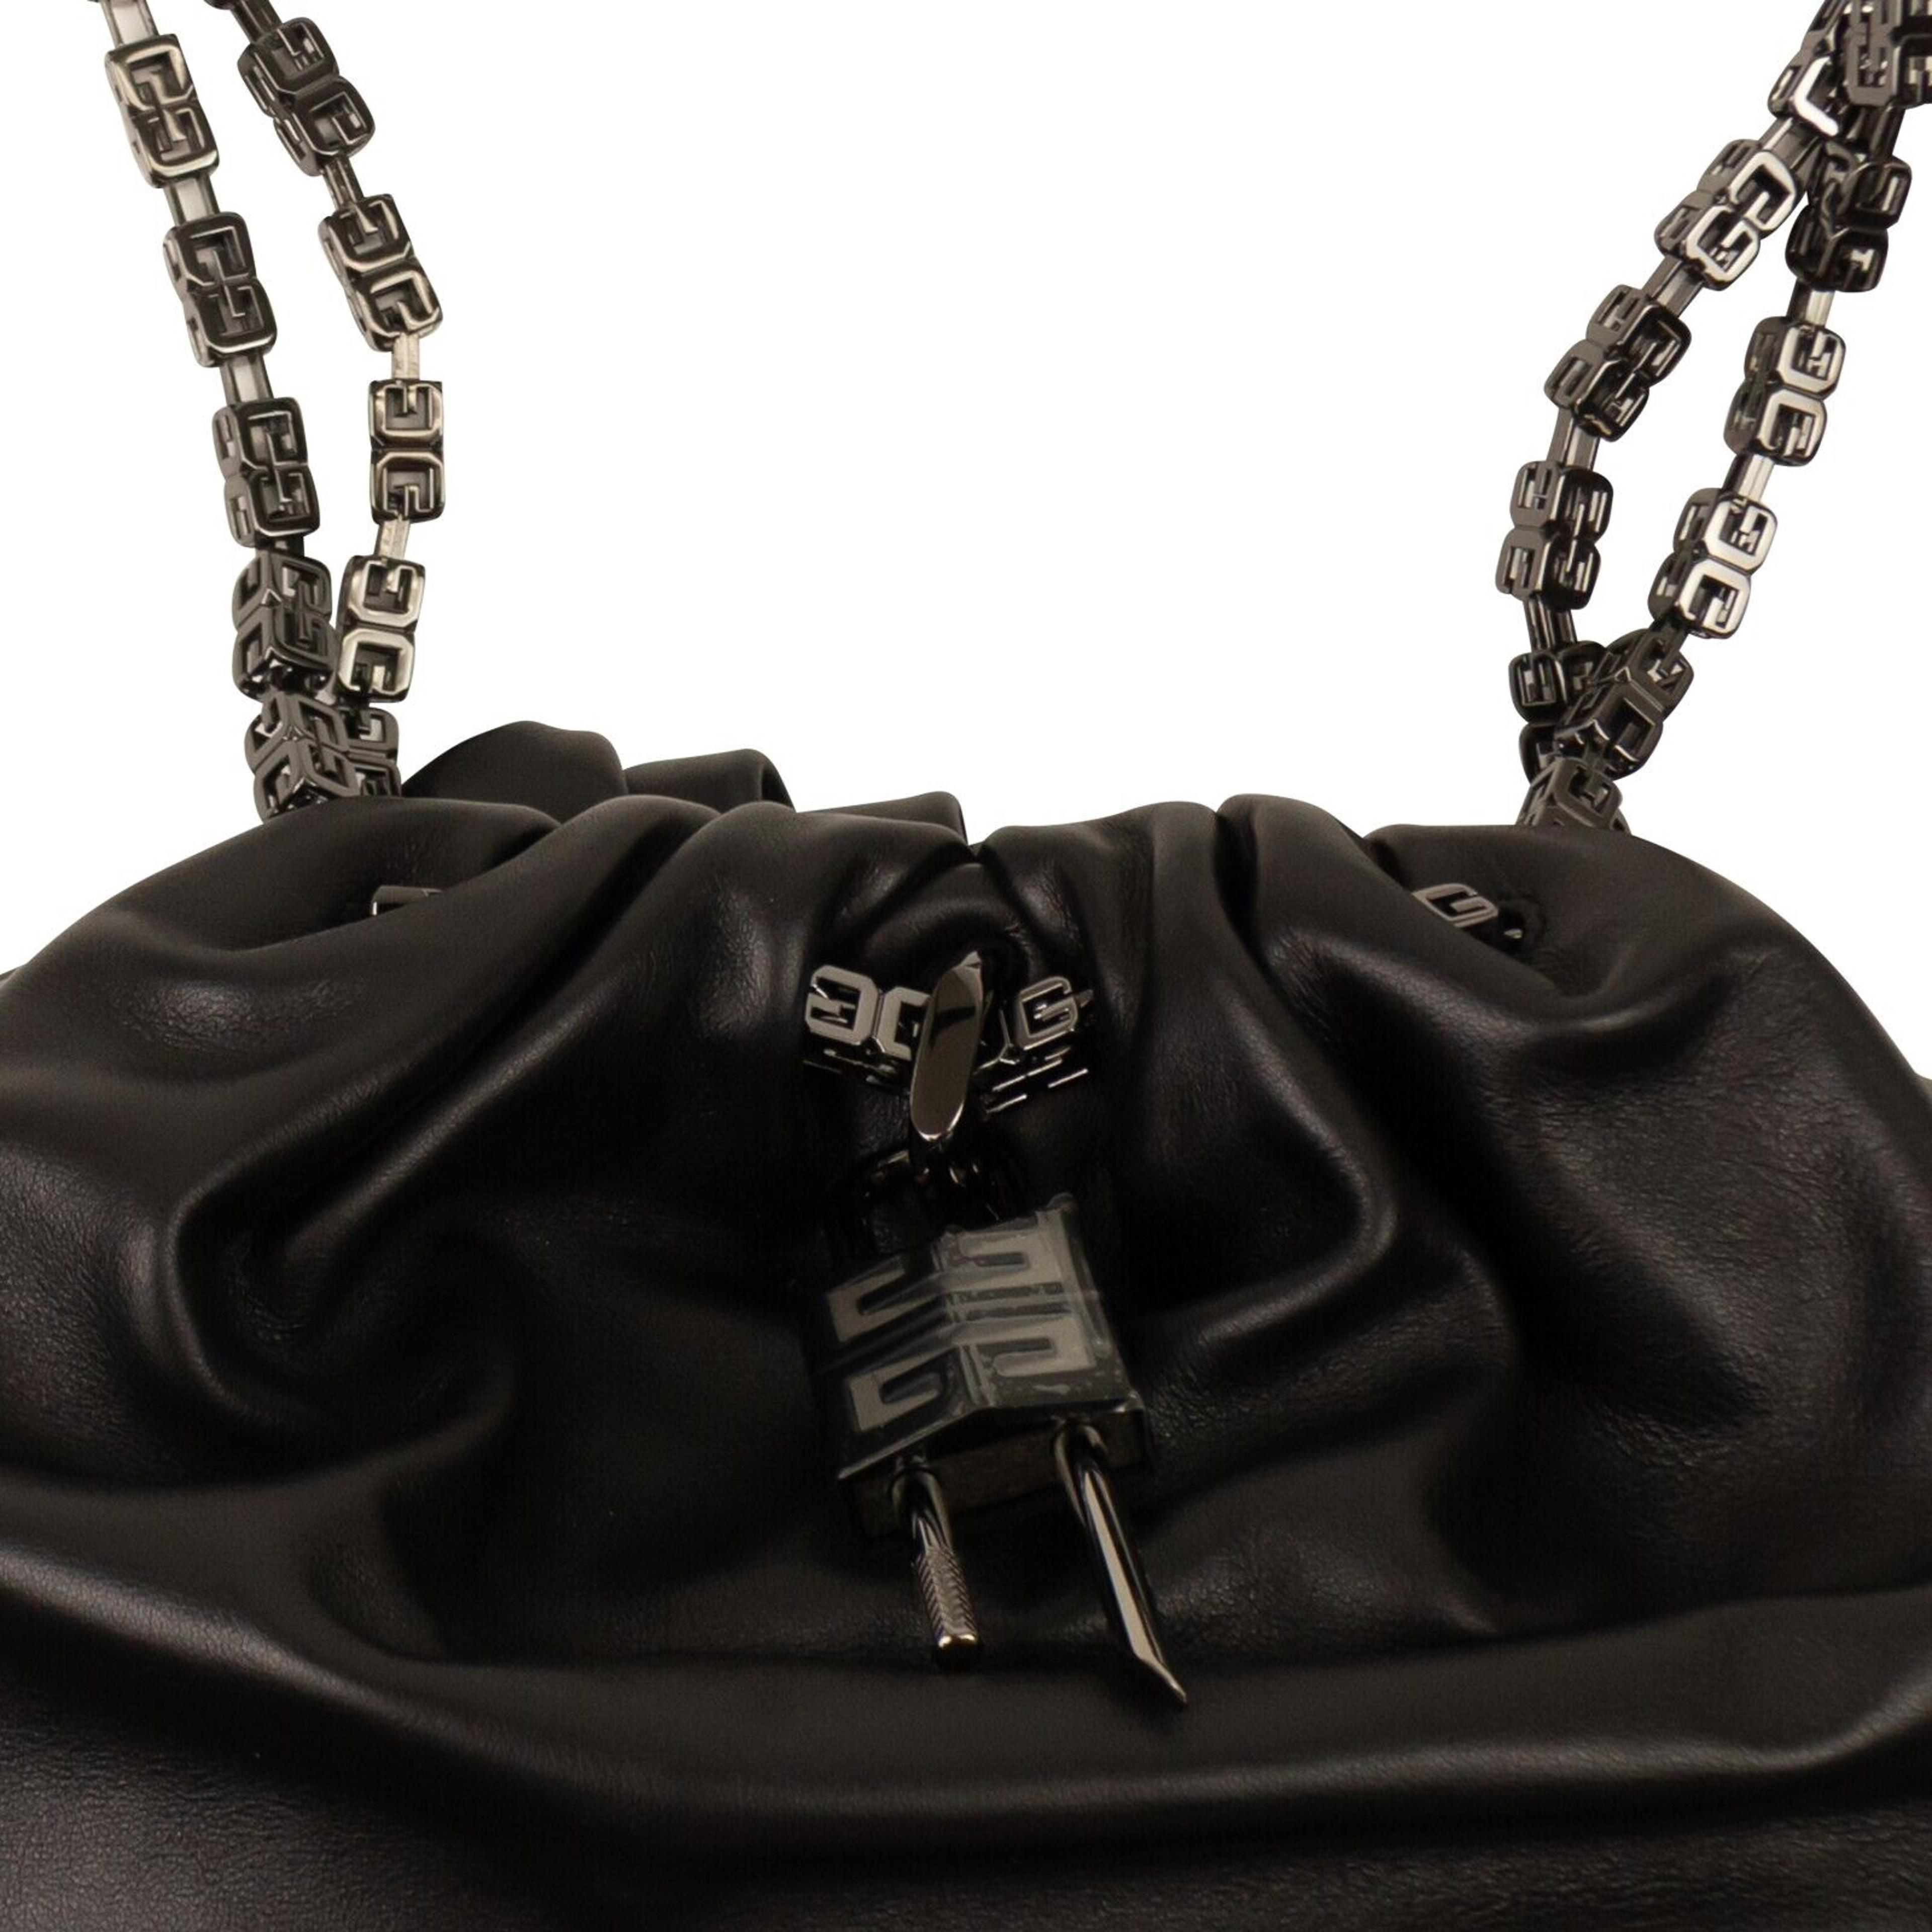 Alternate View 1 of Black Leather Kenny Small Shoulder Bag